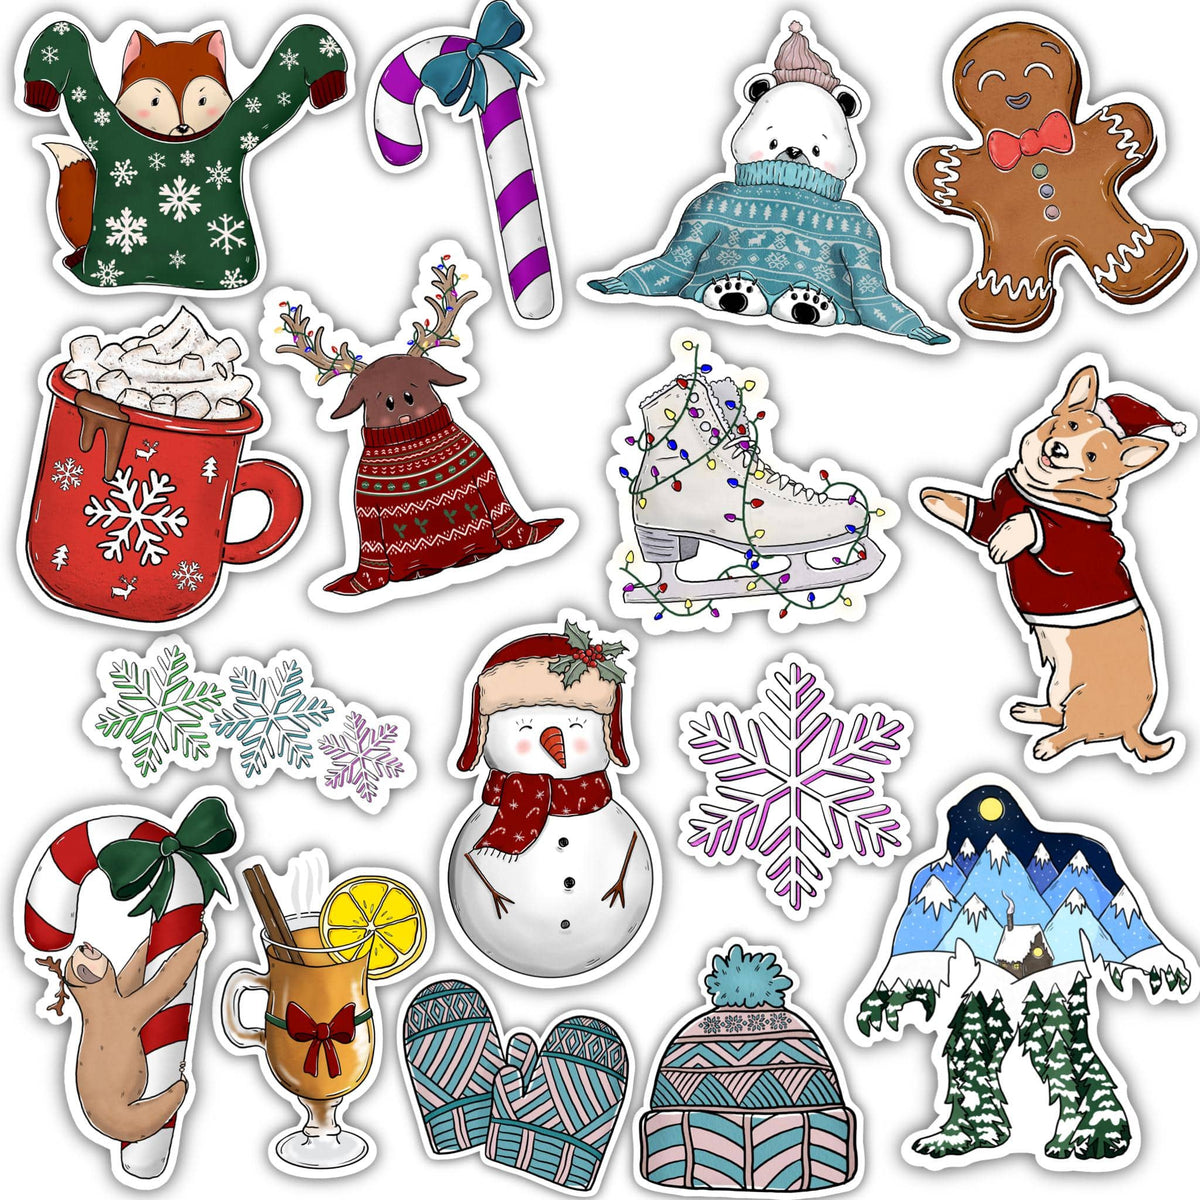 Christmas Snow Sticker by actstitude for iOS & Android